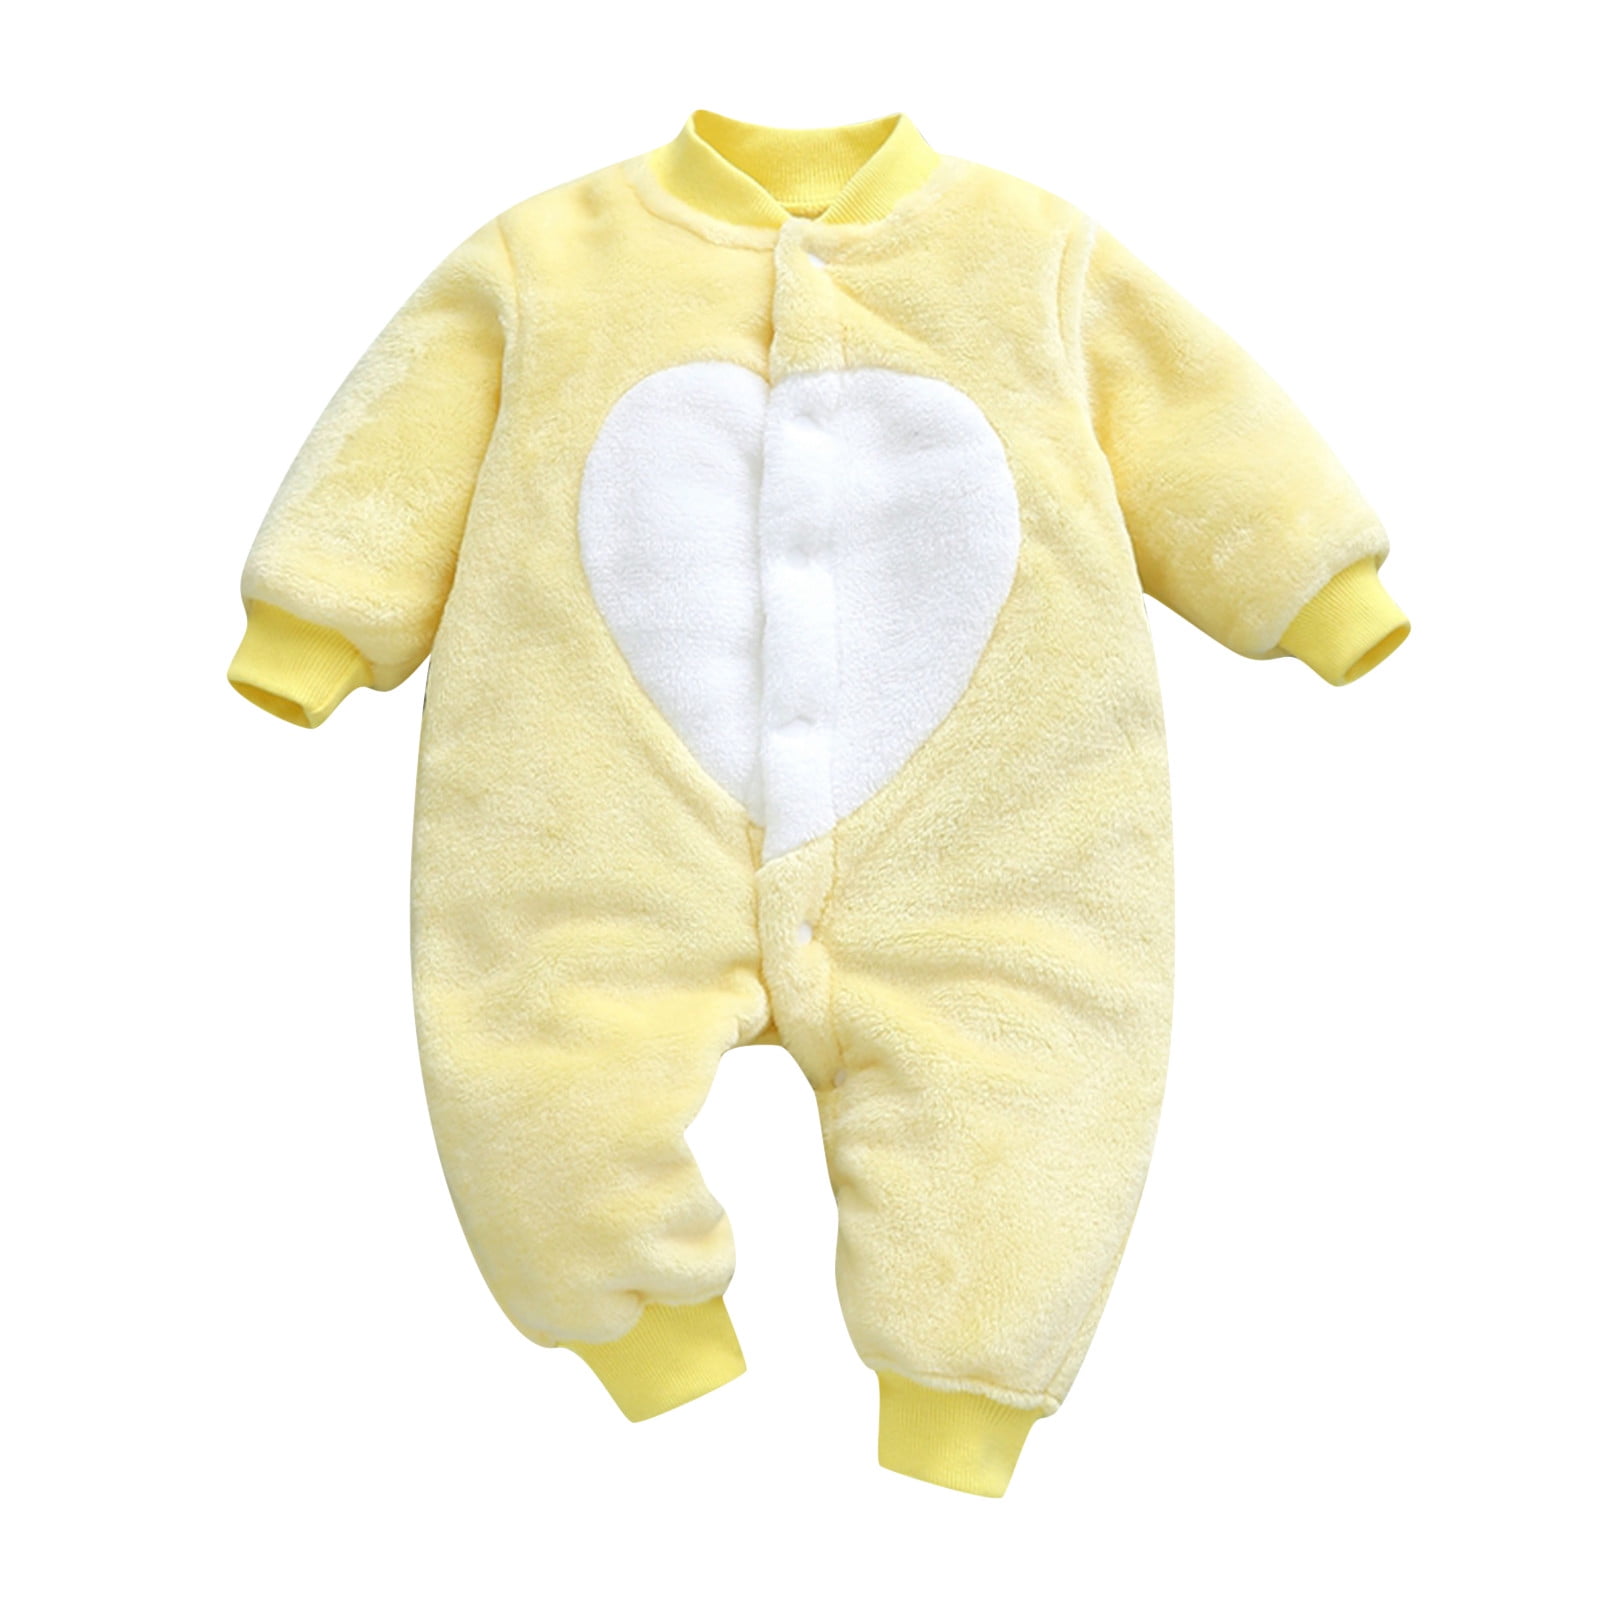 Canesú baby-romper Yellow 12-18M discount 79% KIDS FASHION Baby Jumpsuits & Dungarees Basic 